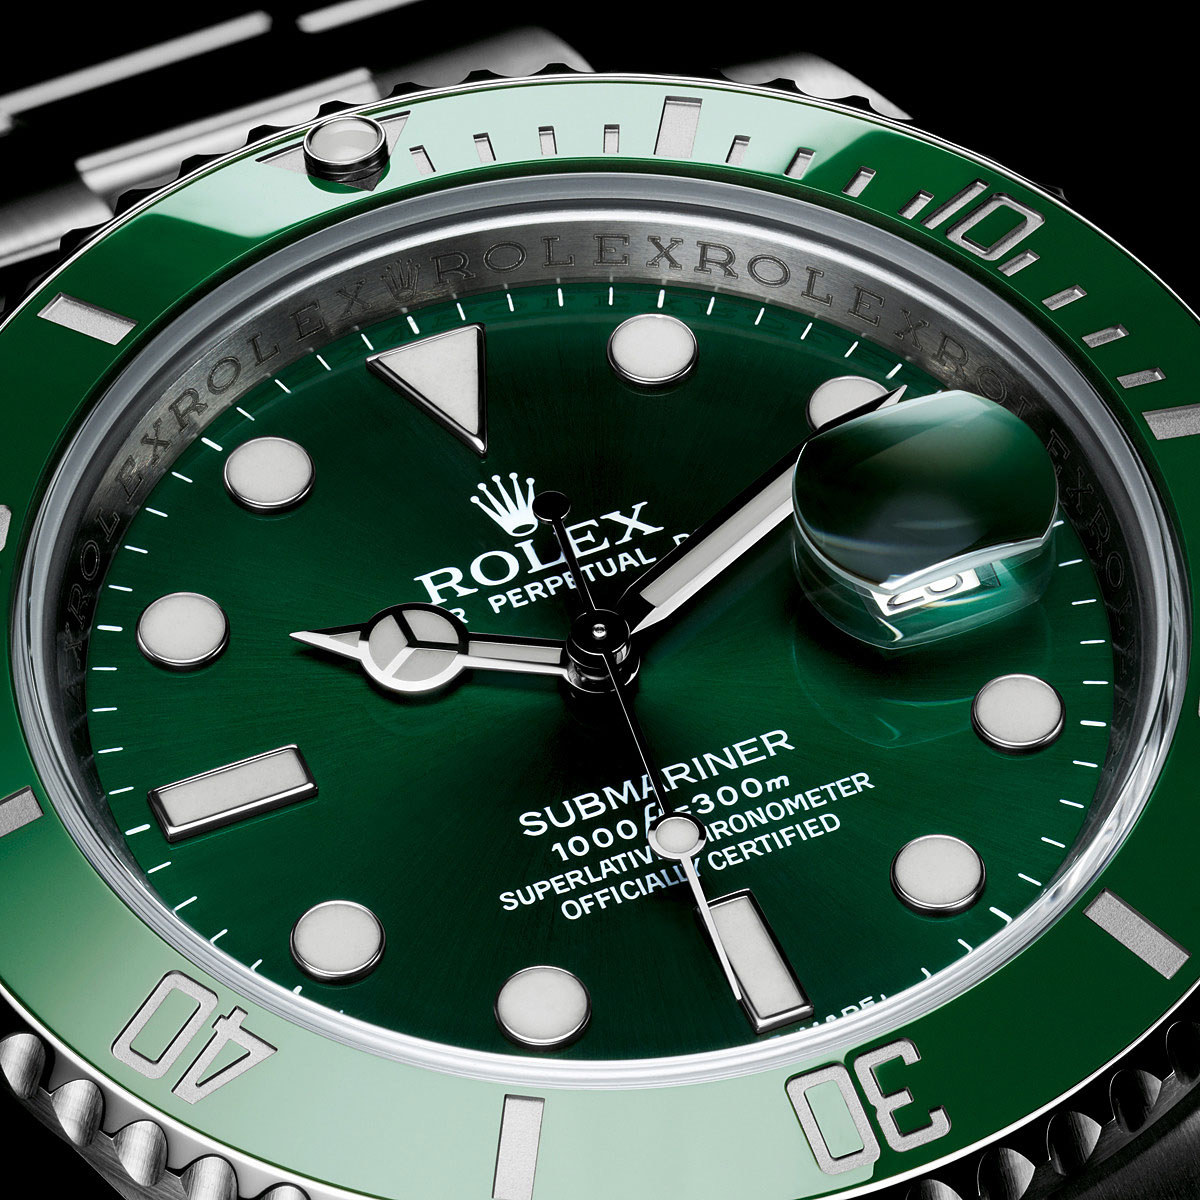 Get your hands on a Rolex Hulk (right now) and don't be left green